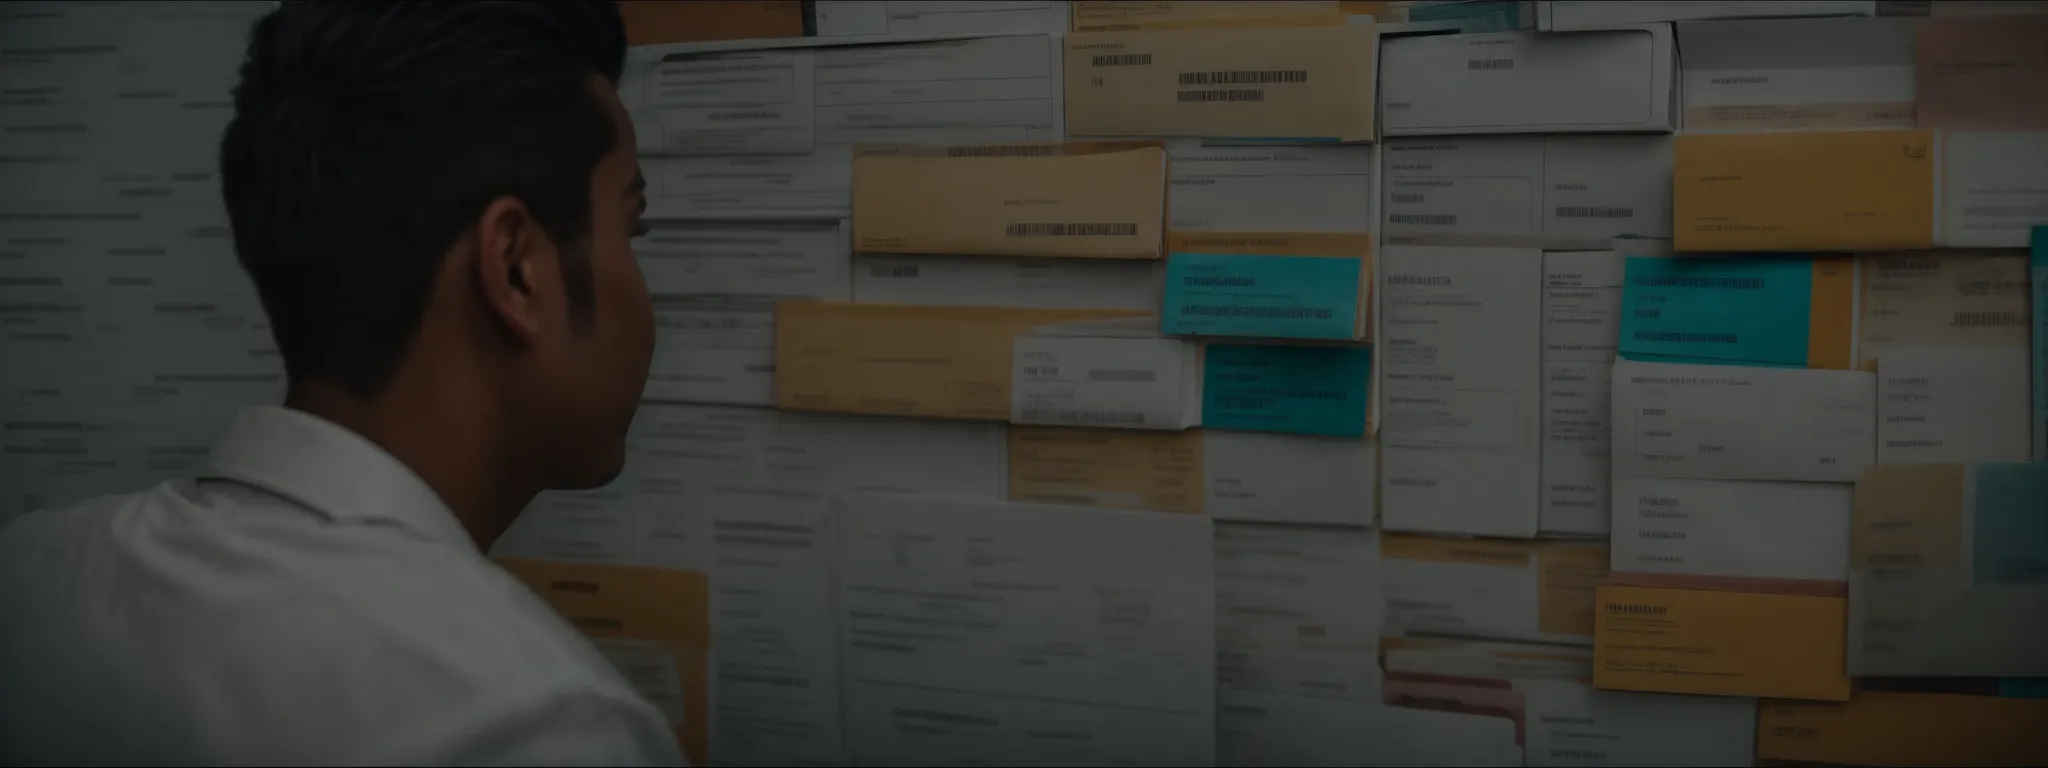 a person analyzing a stack of folders labeled with various website categories.